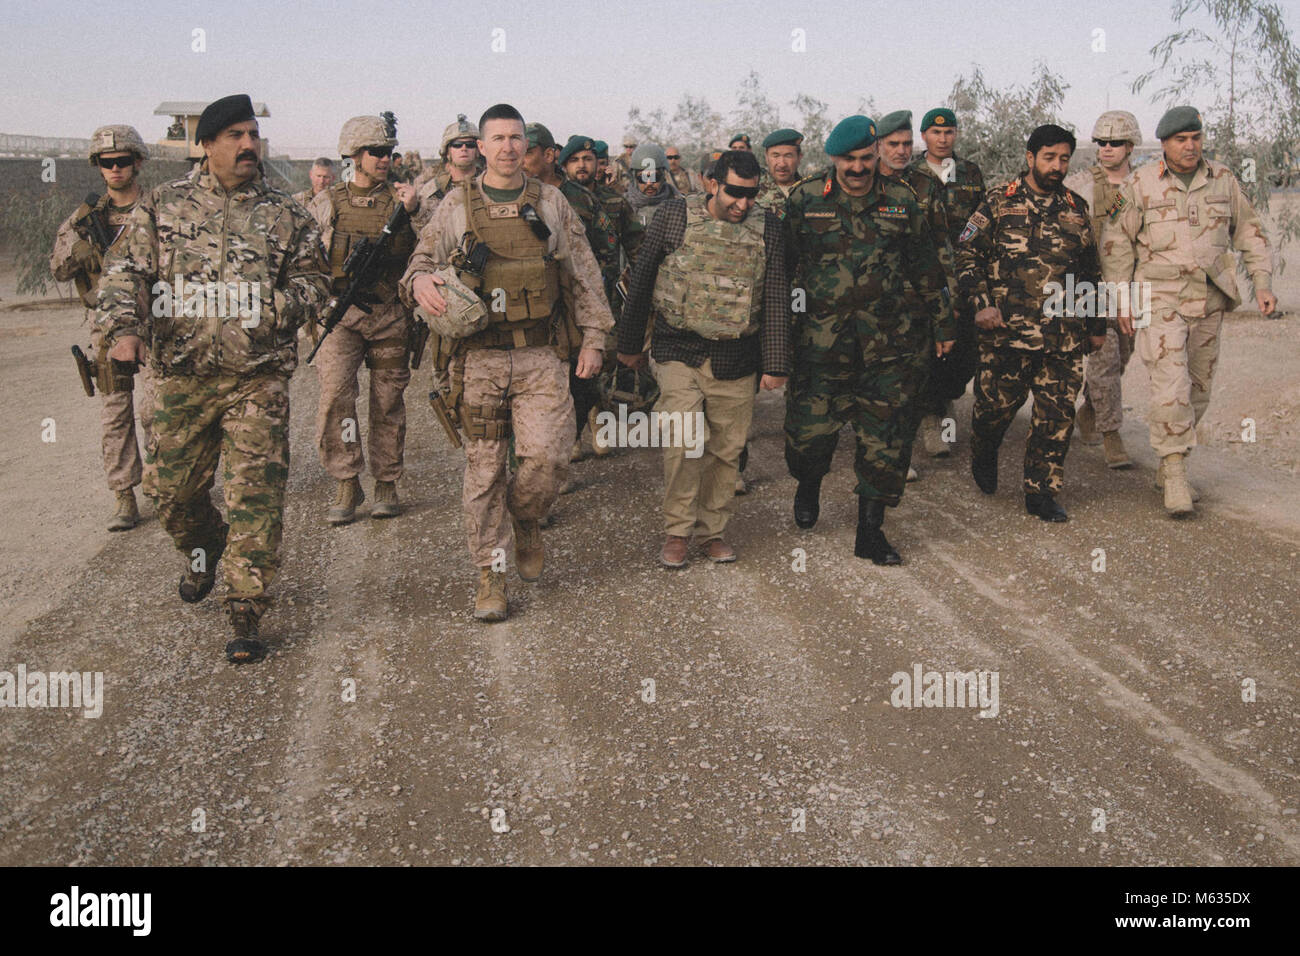 U.S. Marine Brig. Gen. Benjamin T. Watson, commanding general of Task Force Southwest (TFSW), walks with leaders of the Afghan National Defense and Security Force (ANDSF) at Camp Delaram, Afghanistan Feb. 5, 2018. Key leaders from TFSW and the ANDSF conducted a security shura to gain a greater understanding of the security situation through local elders from Nimroz province.   (U.S. Marine Corps Stock Photo